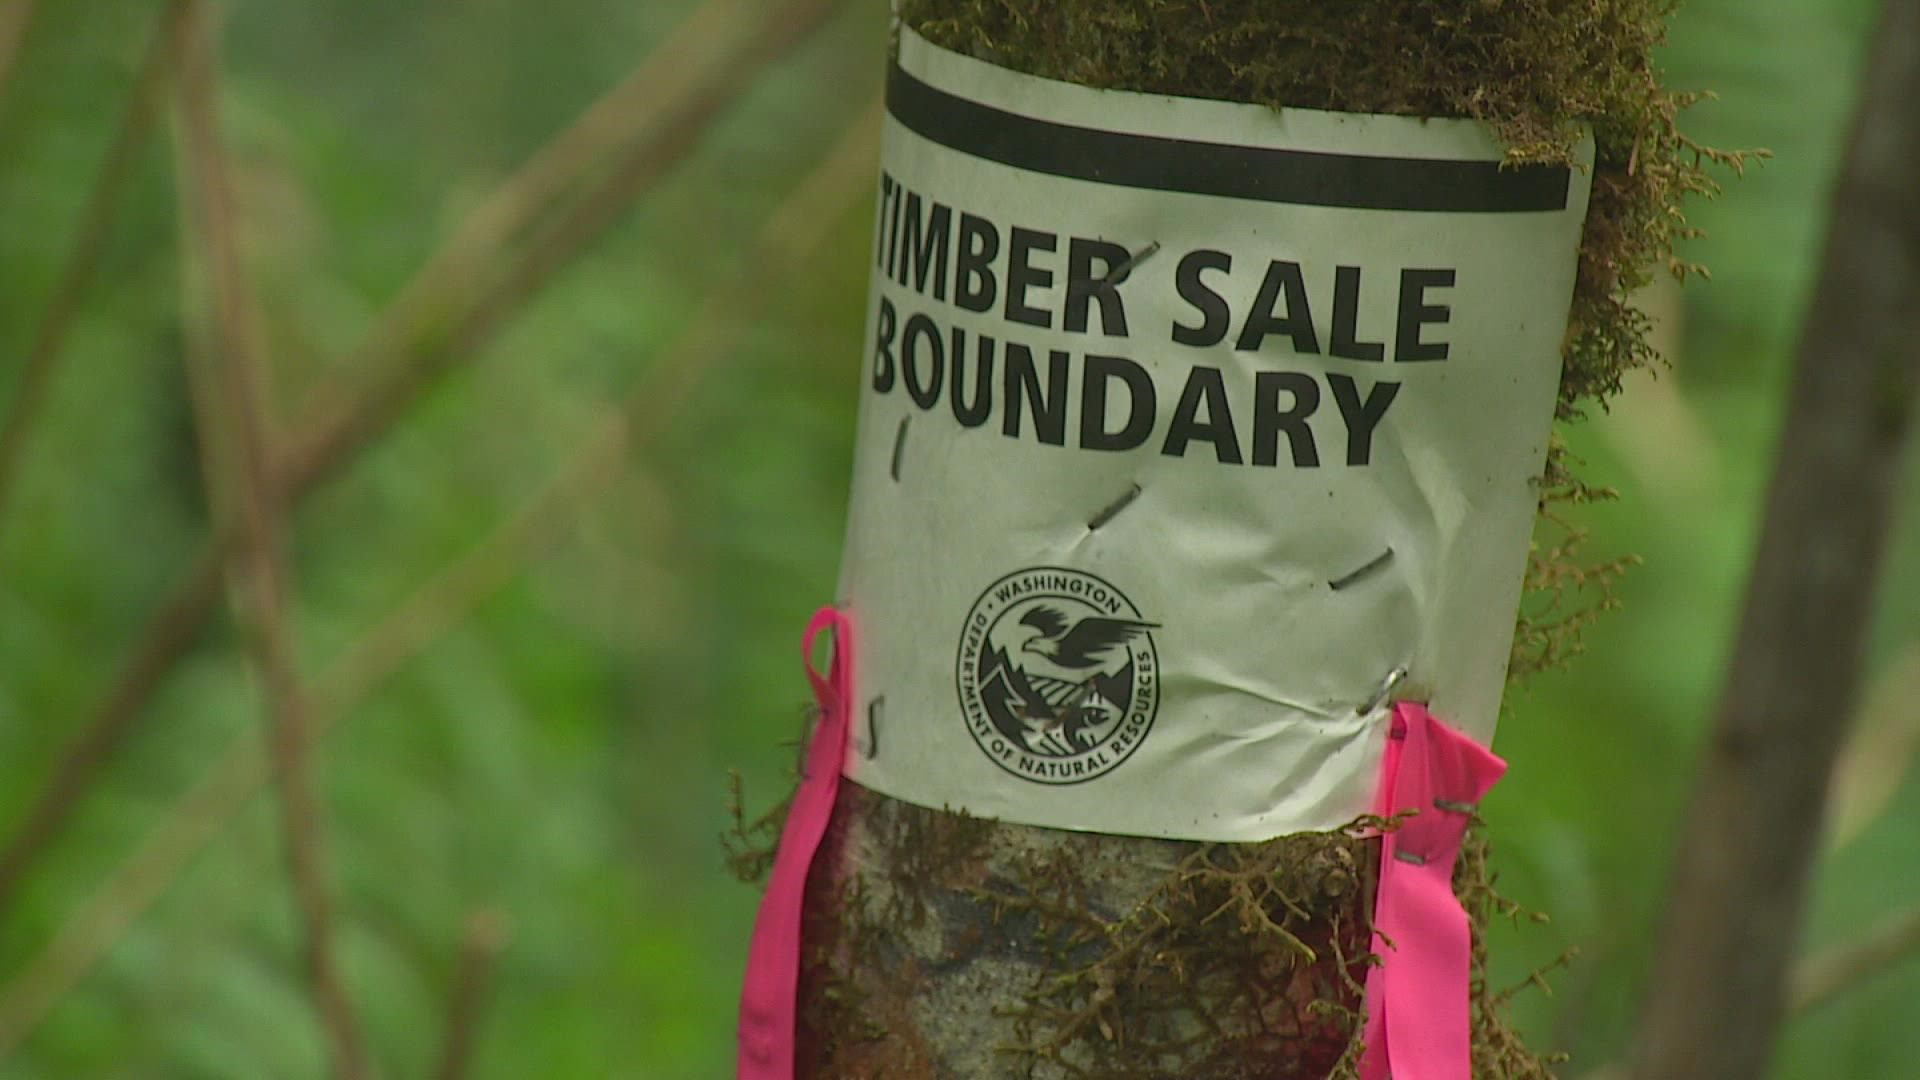 A DNR spokesperson said the project likely will be delayed, not canceled.